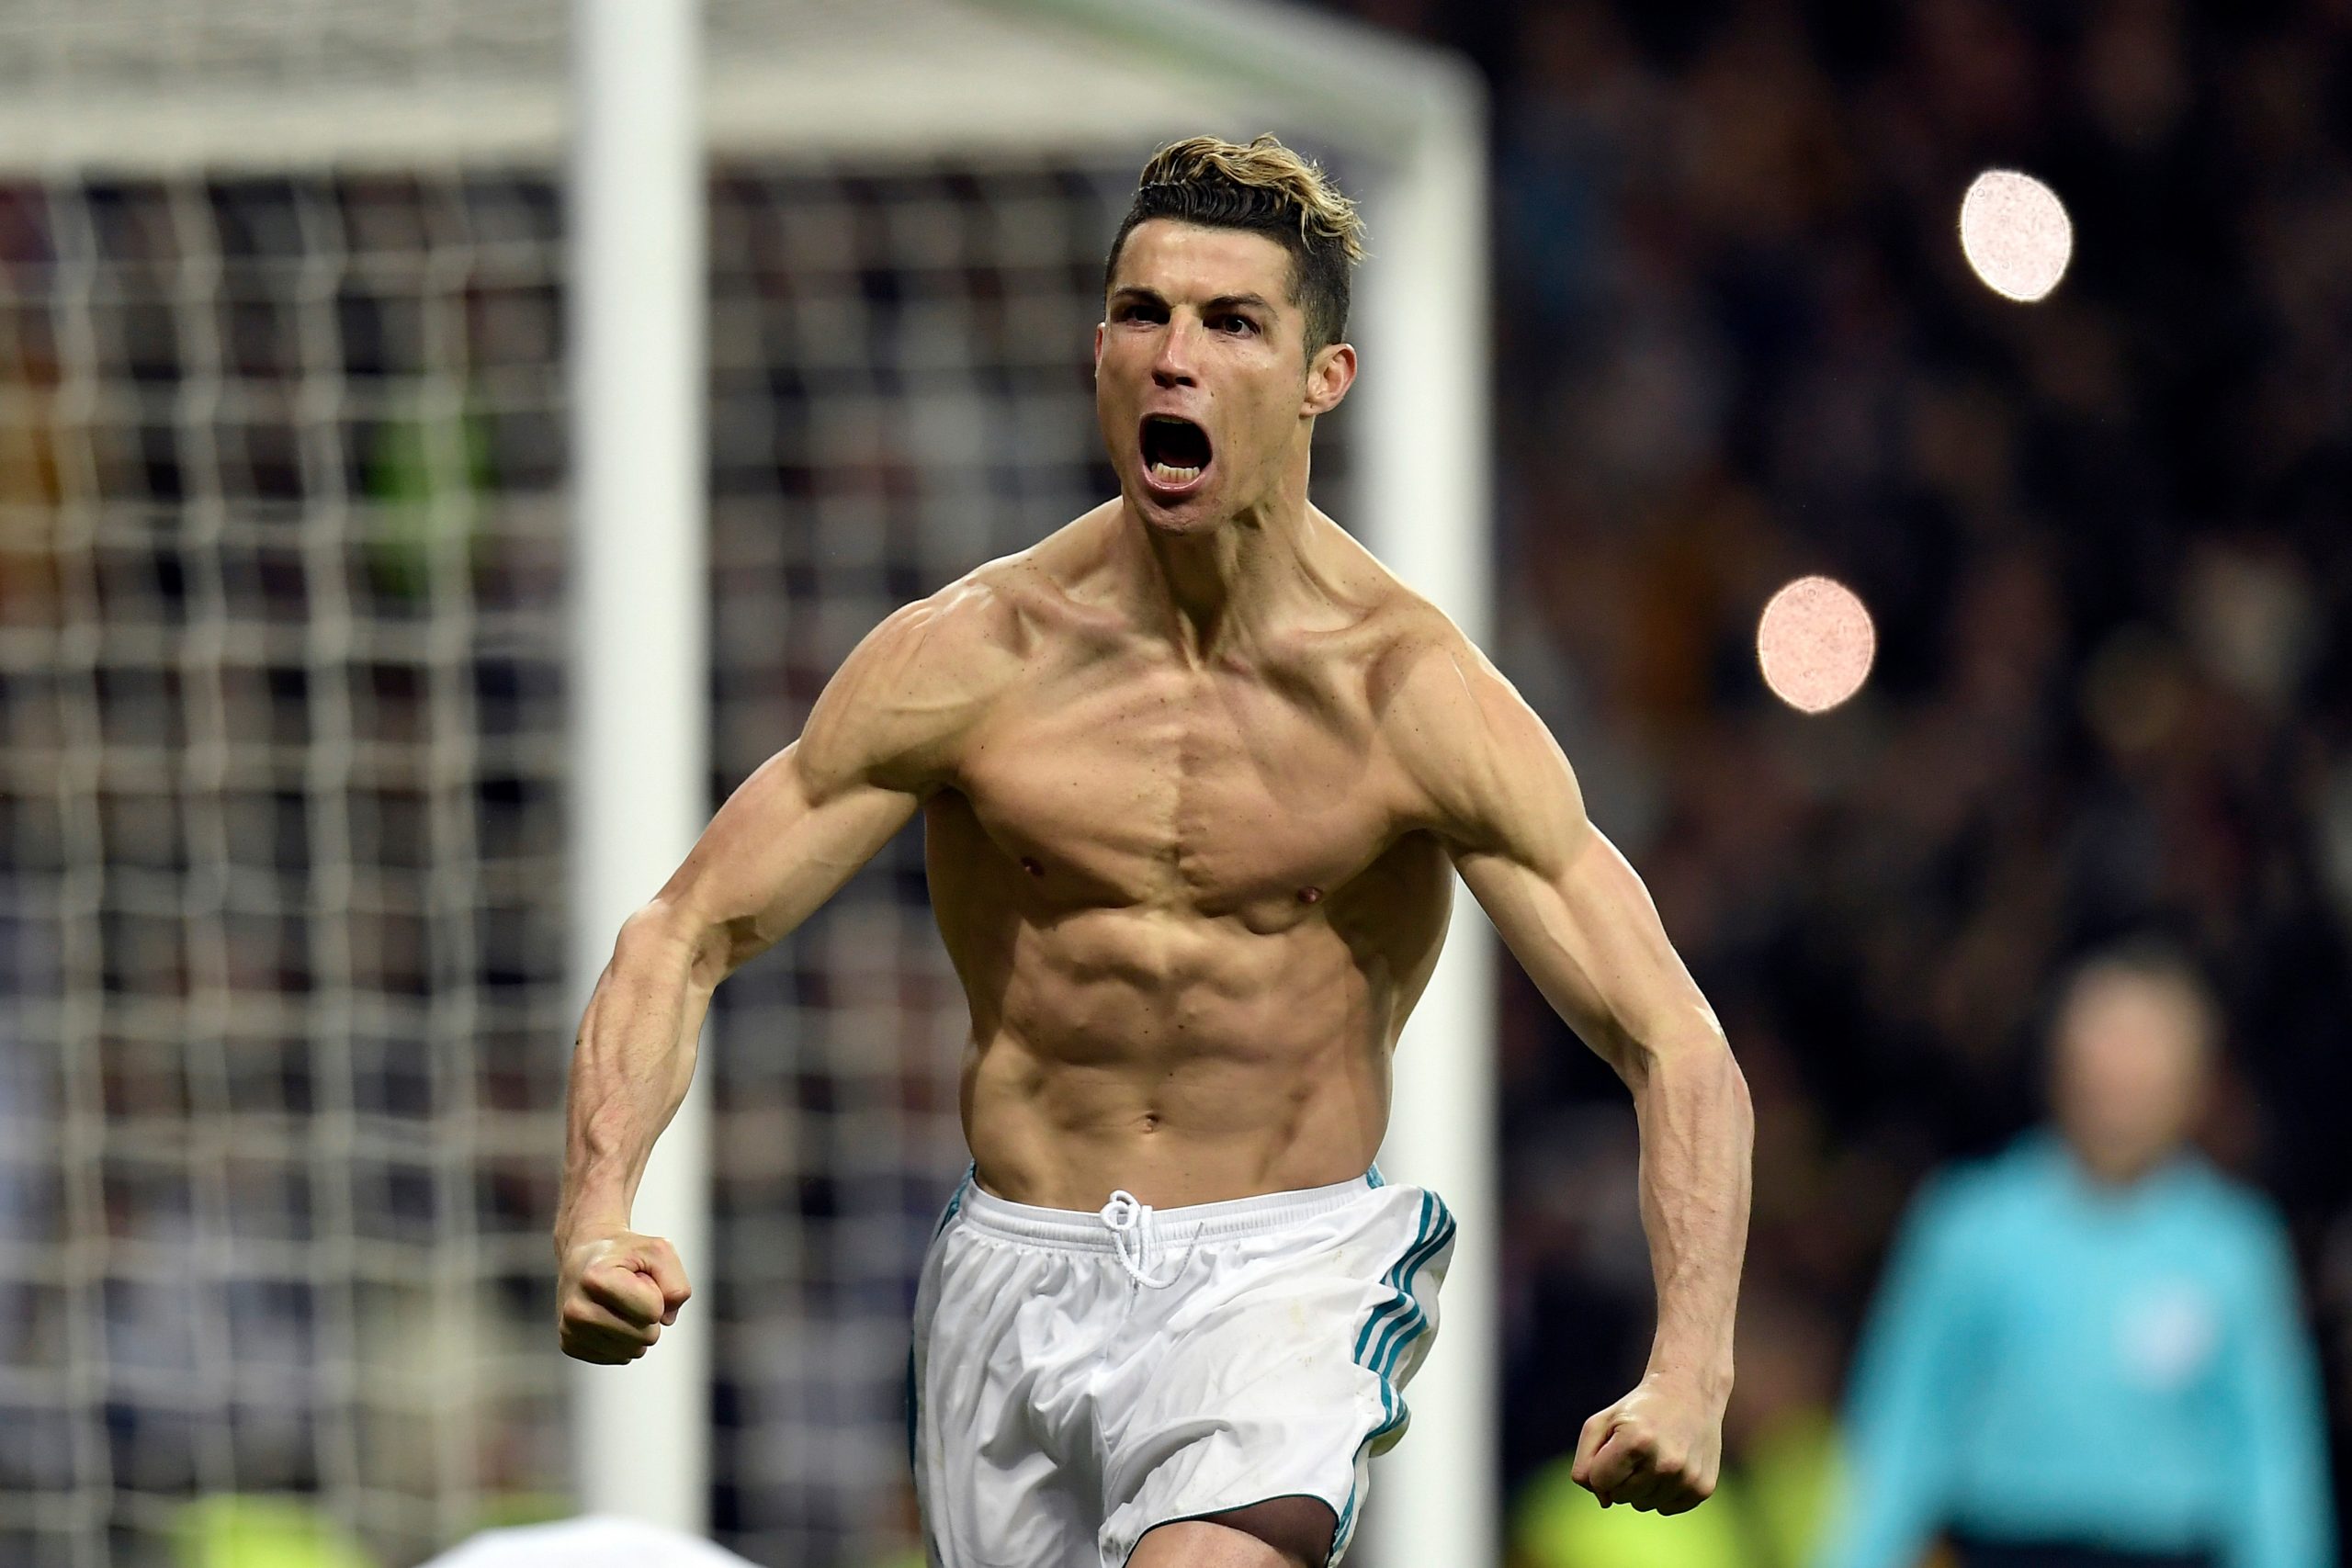 Cristiano Ronaldo at 36: The perfect marriage of will power and audacity